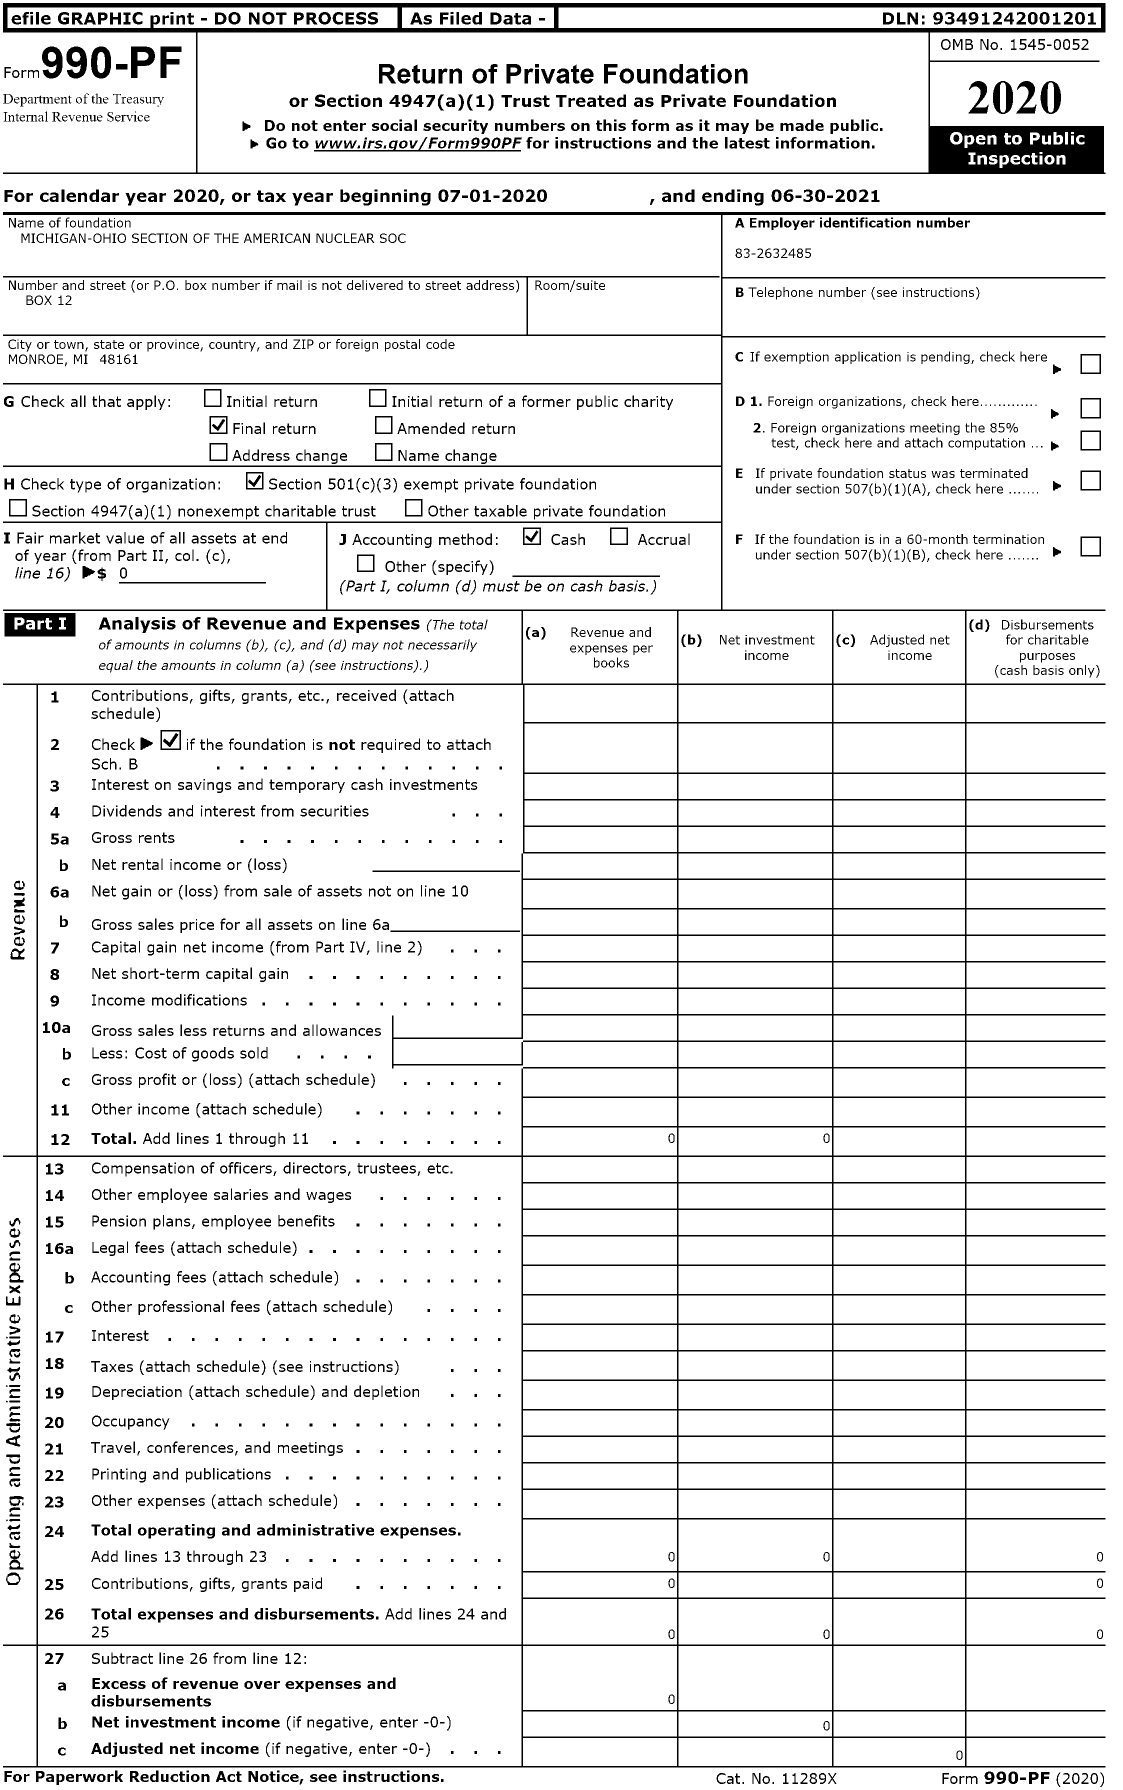 Image of first page of 2020 Form 990PF for Michigan-Ohio Section of the American Nuclear Soc